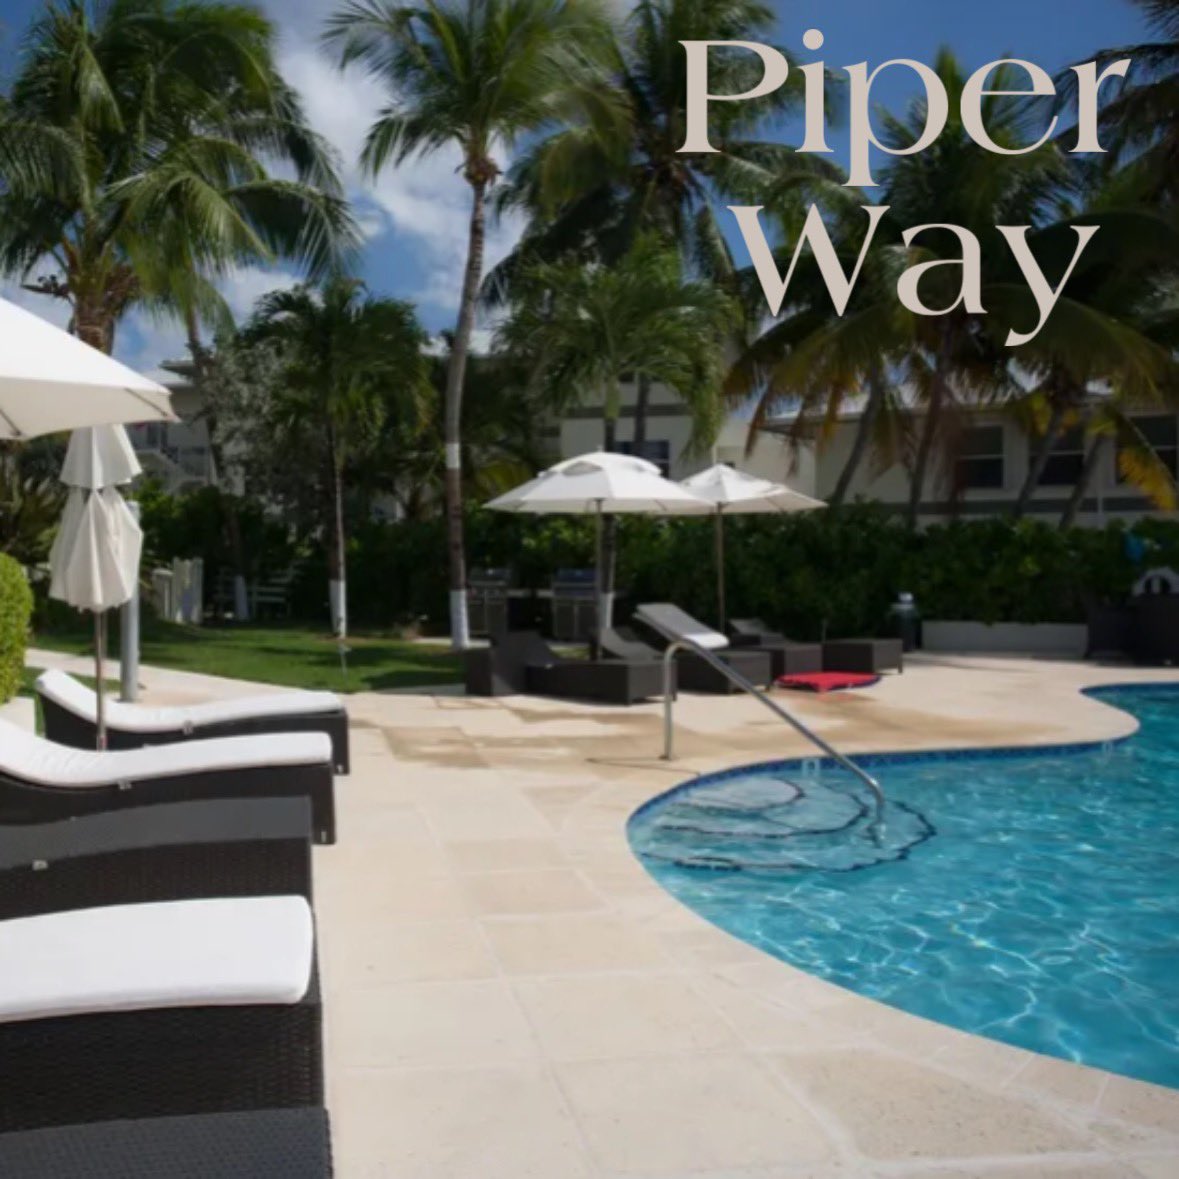 Piper Way

rental pool, fitness center, designated parking space, beach side pool with pristine white sand for as far as the eye can see.

Member of CIREBA 
MLS # 414634

#Thursday #Scuba #WhiteSand 
#CaymanRealEstate #caymansothebysrealty #caymanislandsrealestate